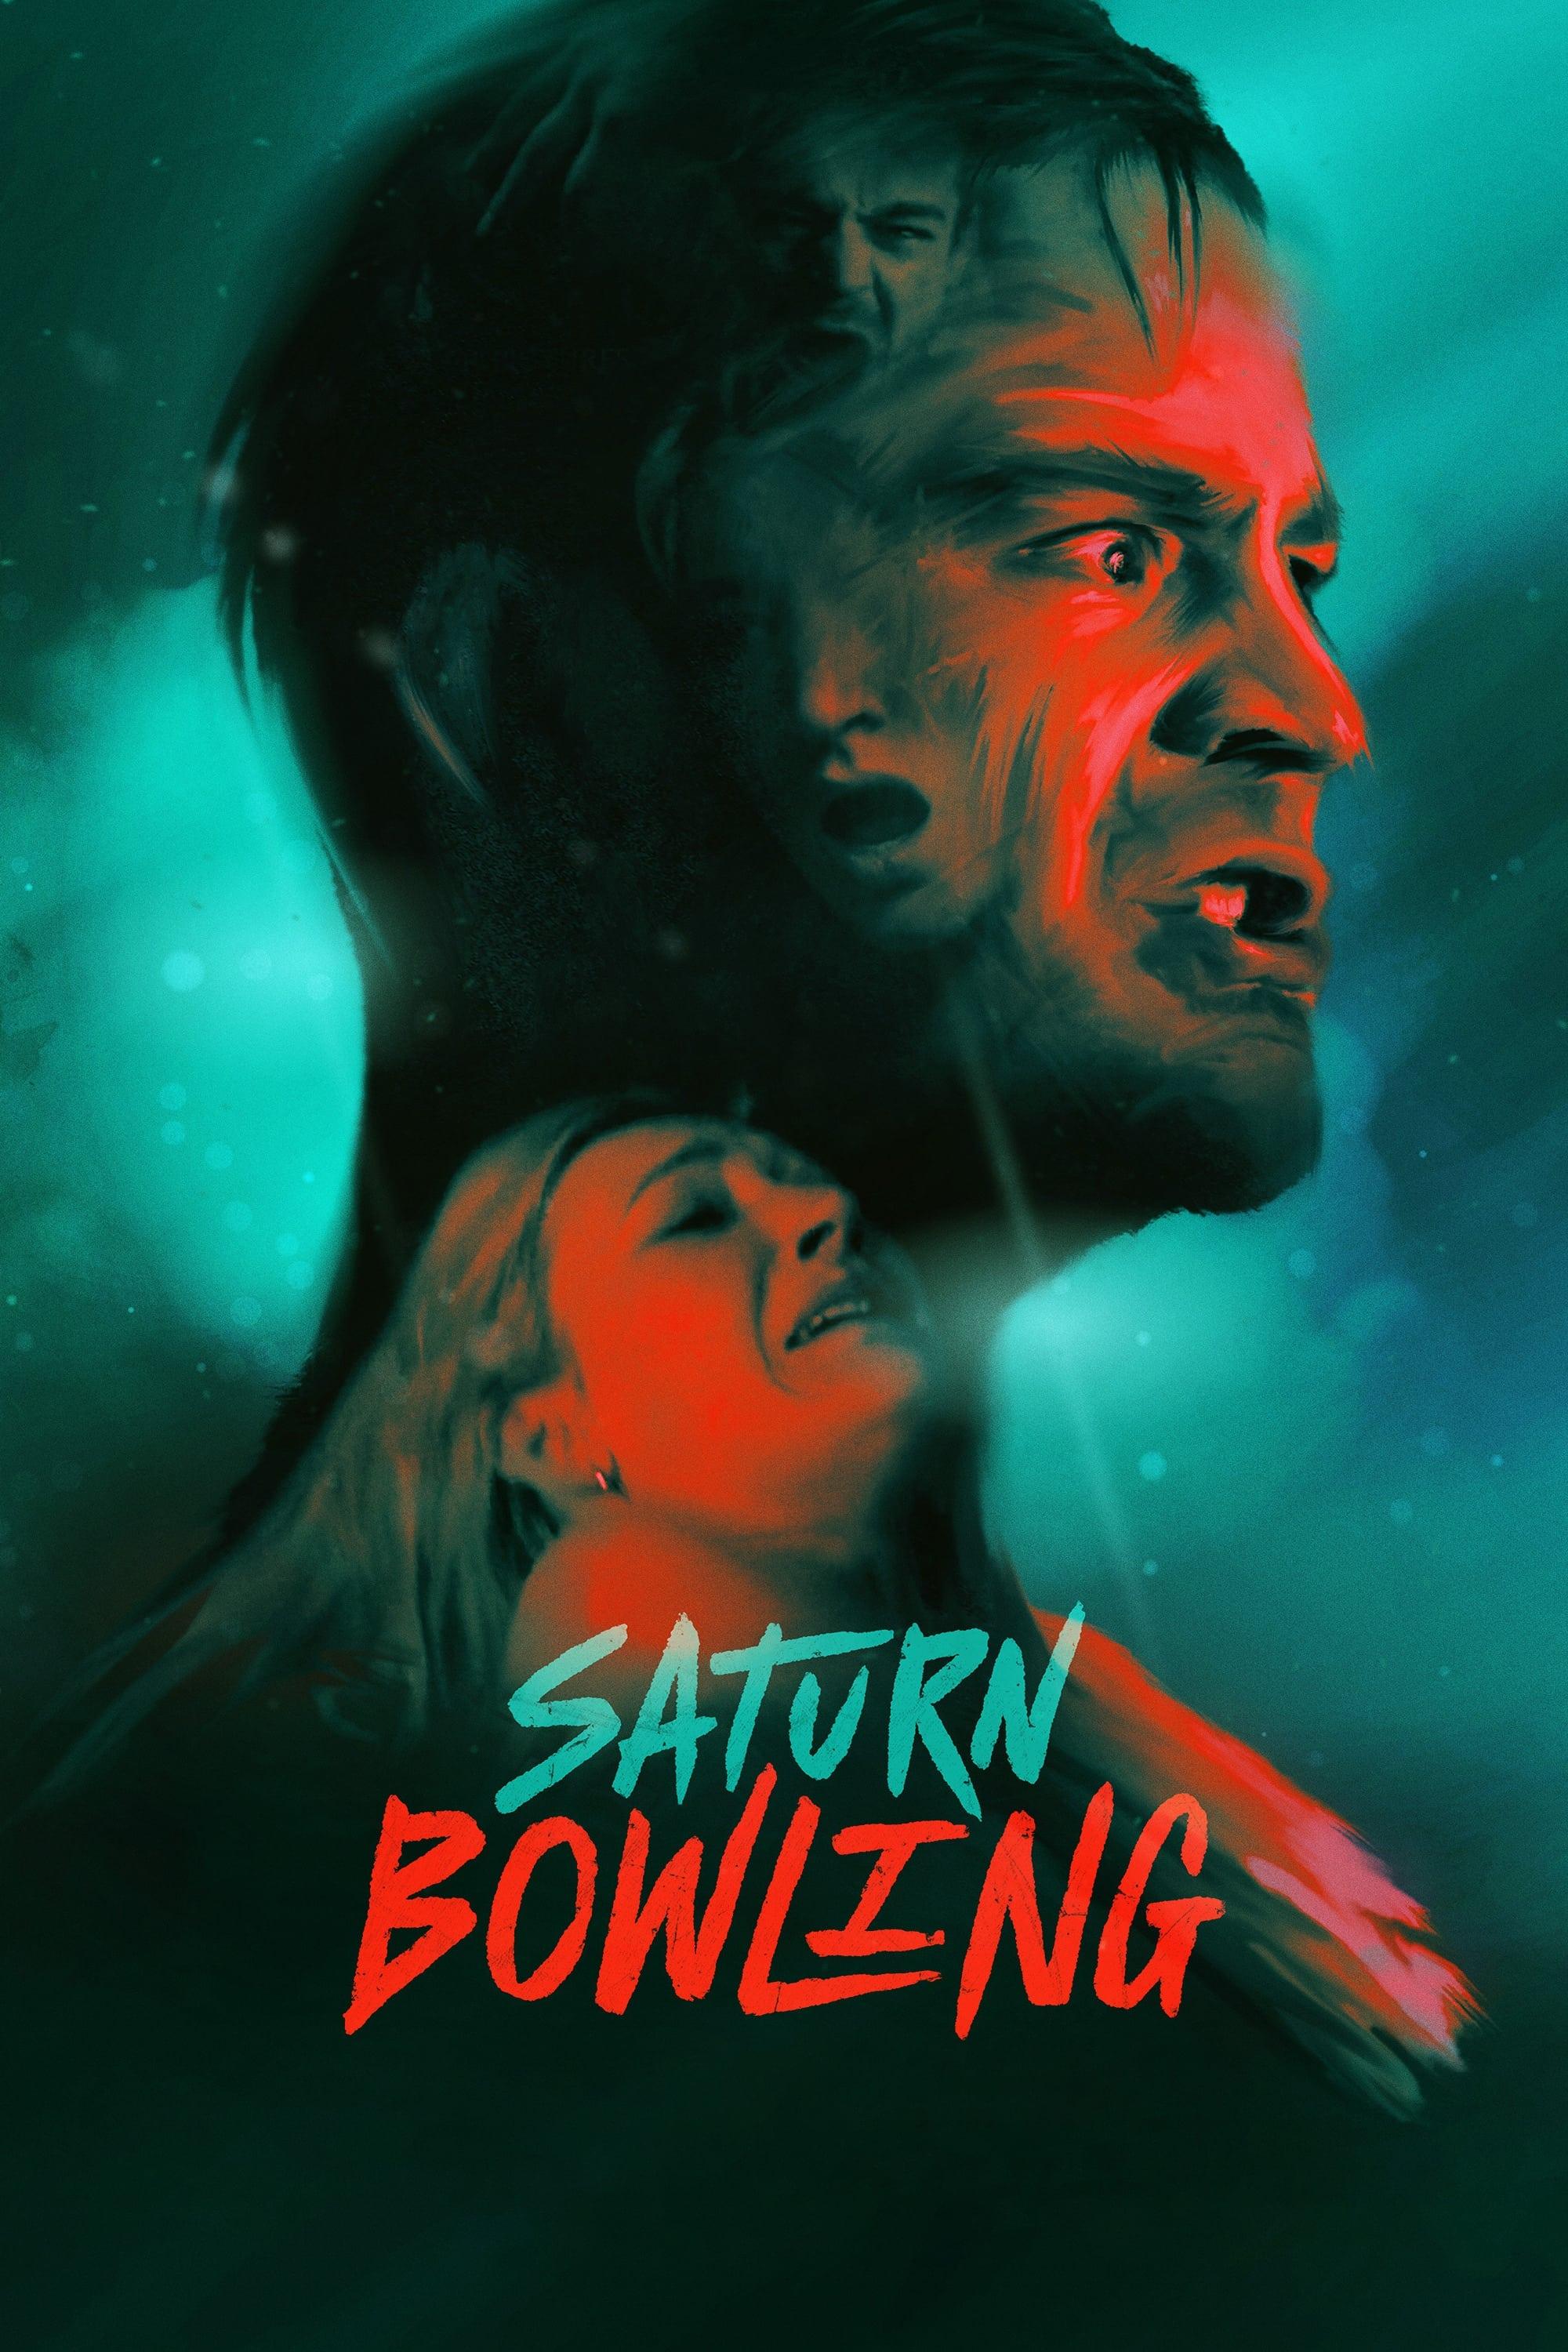 Saturn Bowling poster